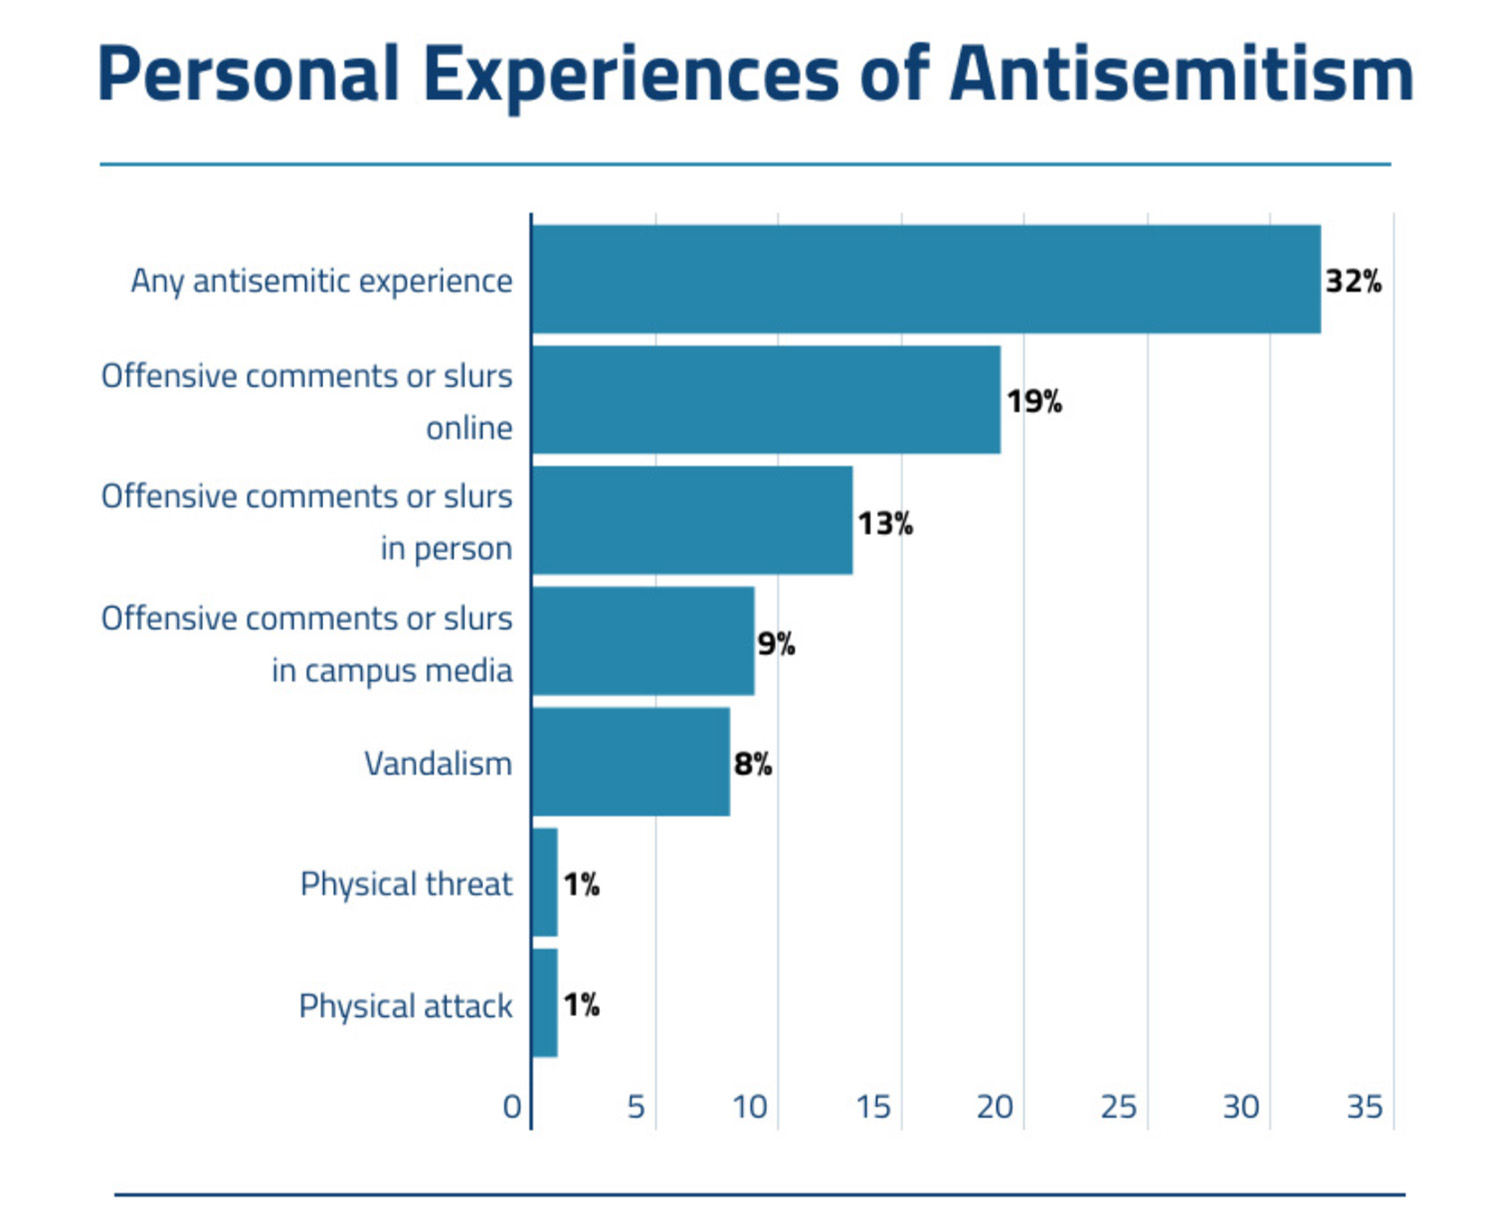 "Personal Experiences of Antisemitism" Graphic courtesy of Hillel International/ADL